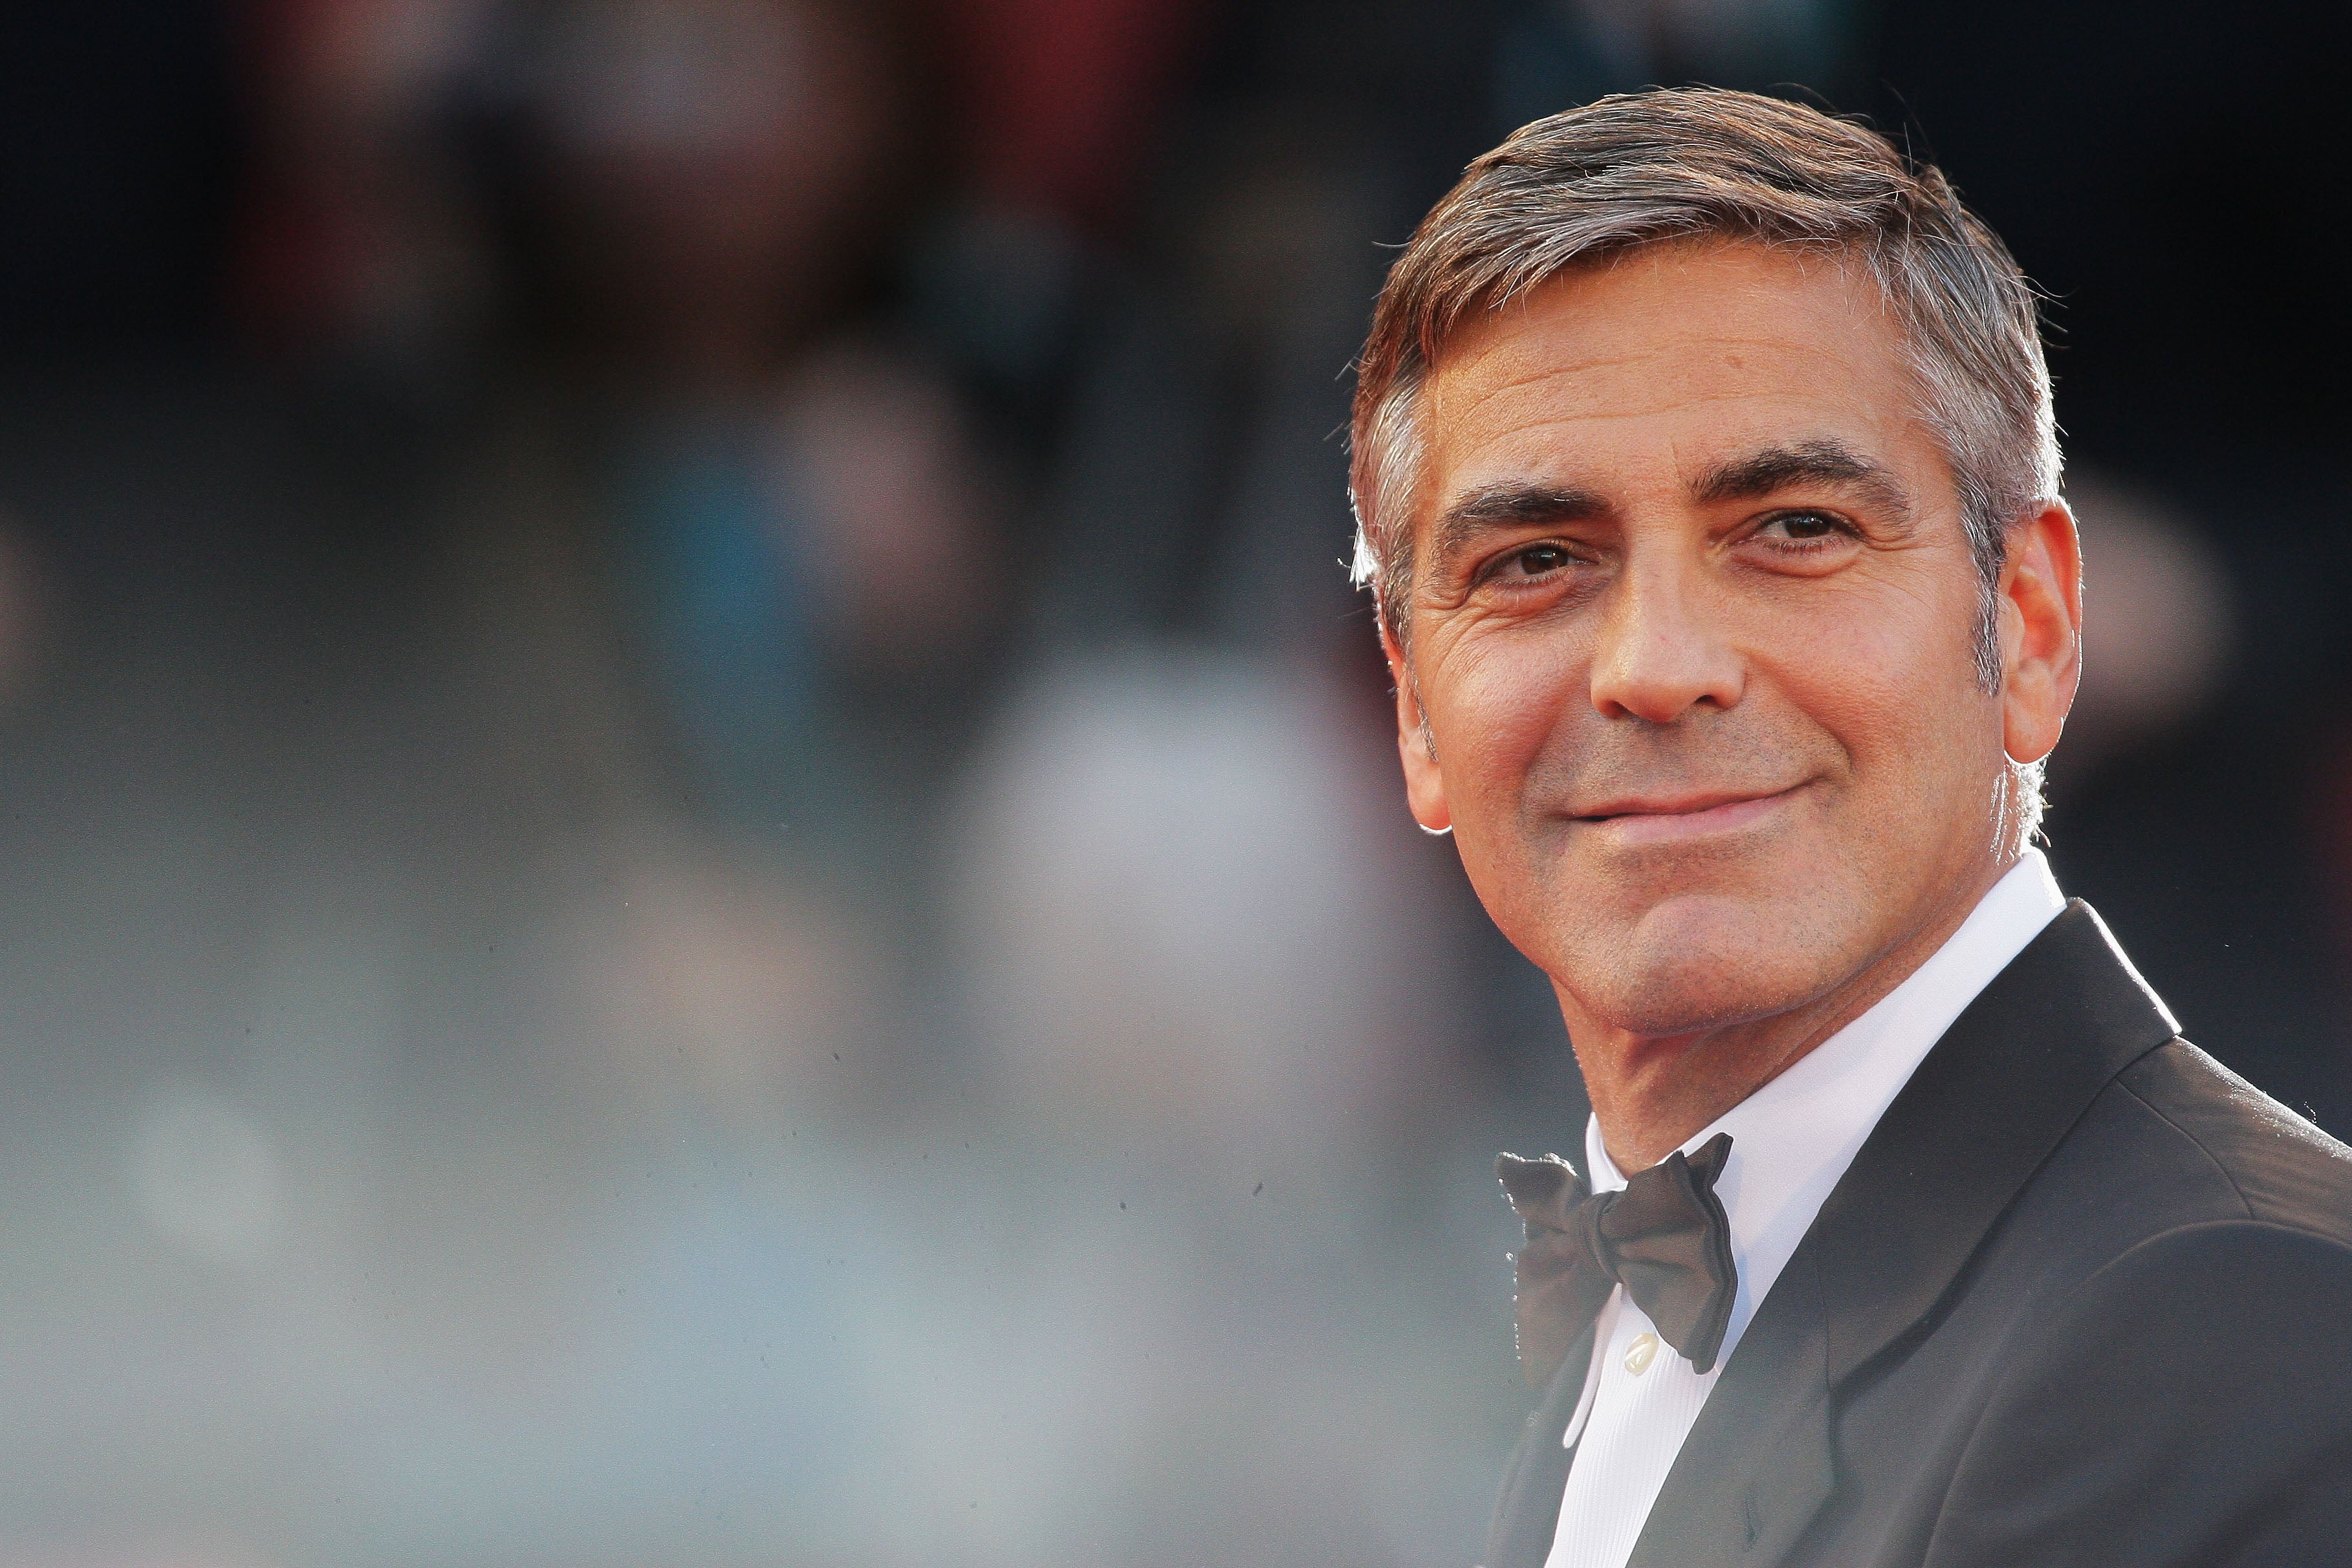 George Clooney(born May 6, 1961), American actor, director, producer